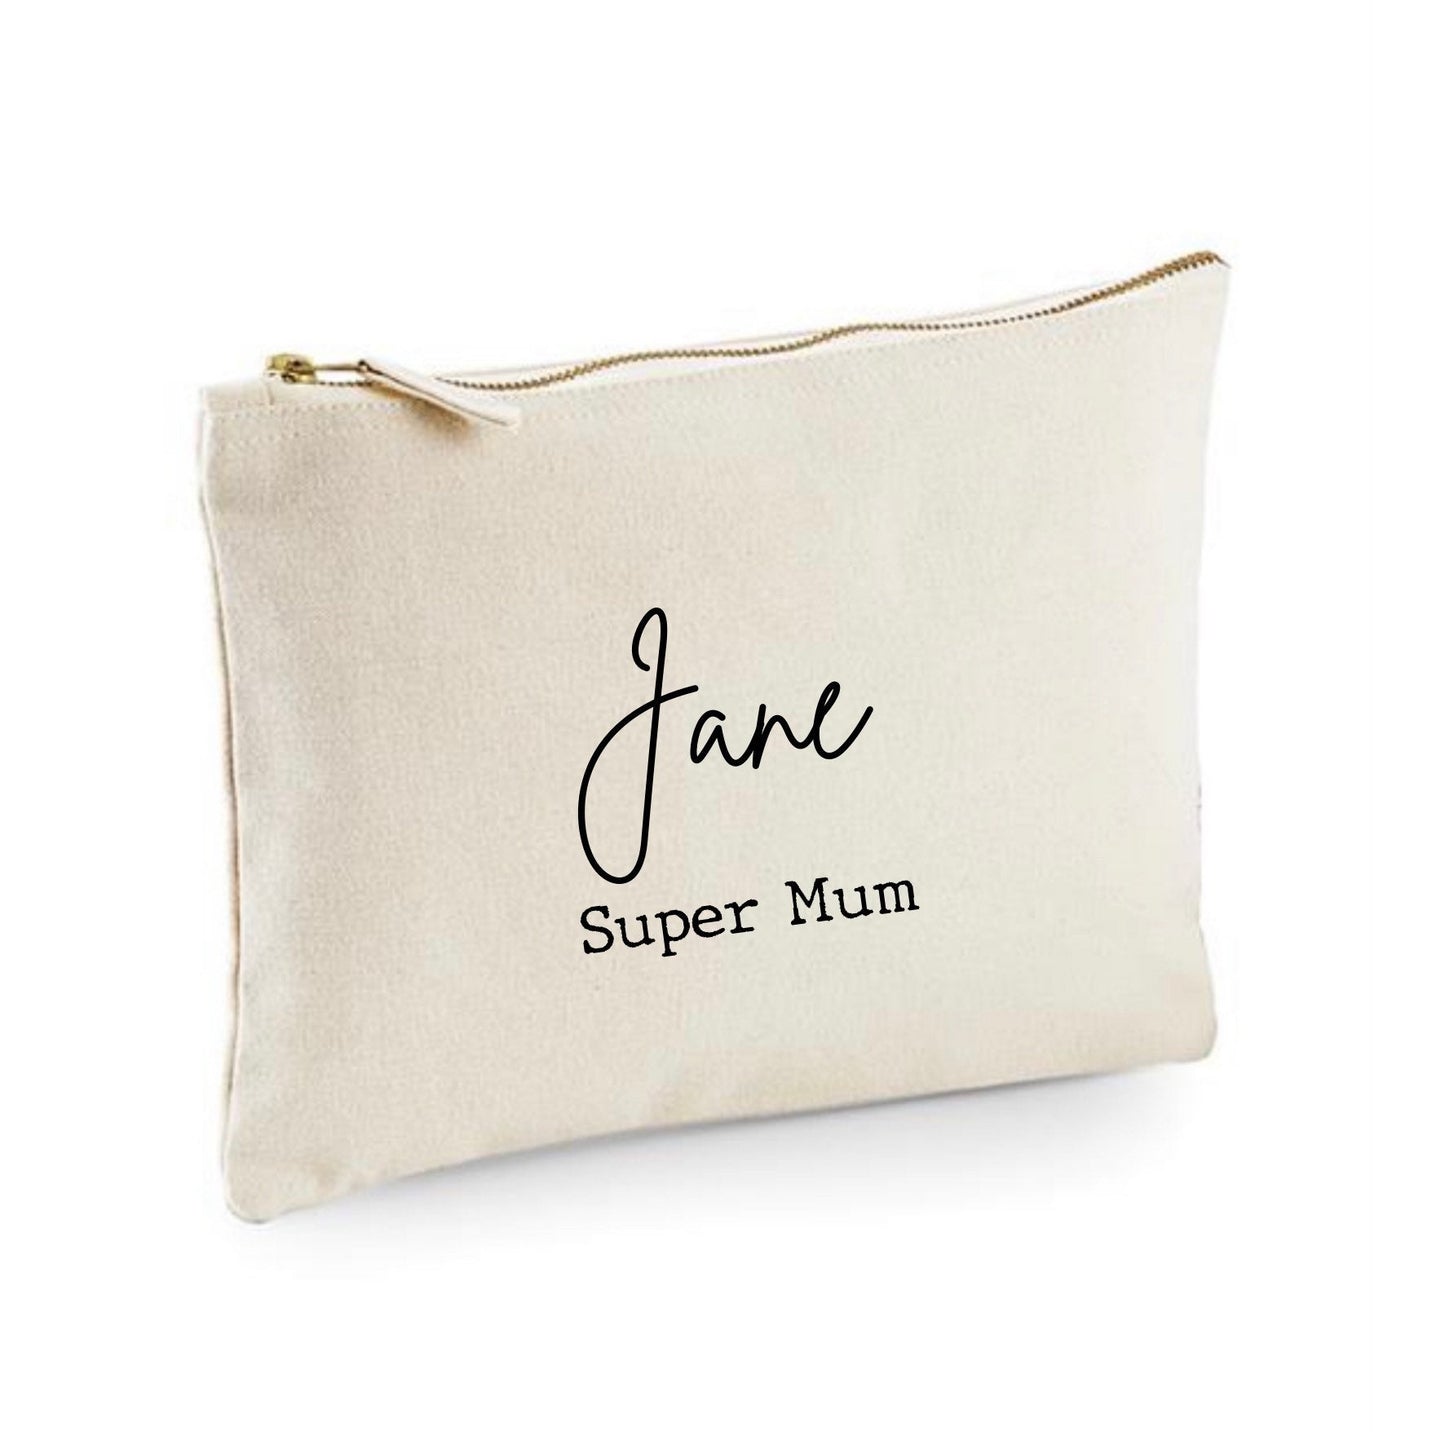 Super Mum pouch, Personalised christmas or birthday gift for mums, new mumma gift,small gifts for mums